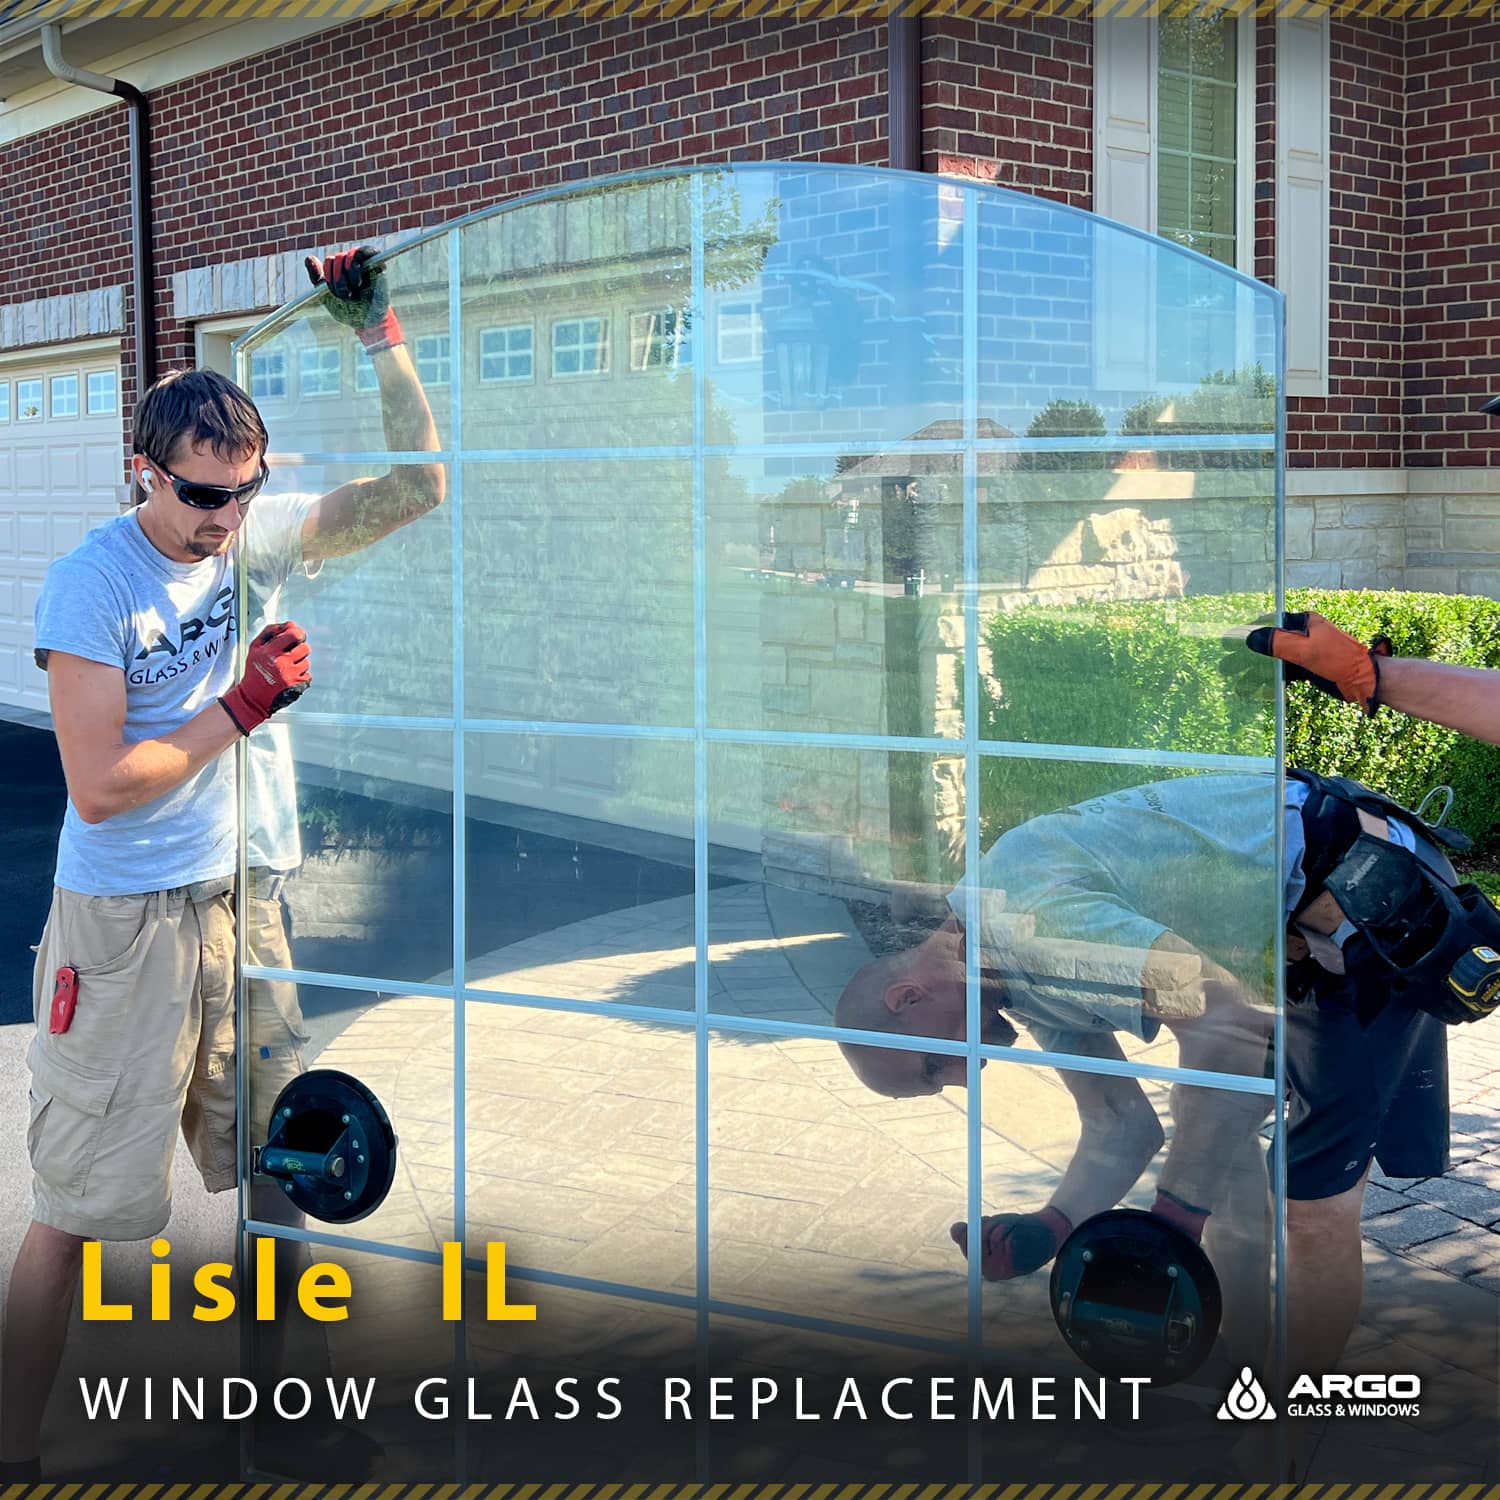 Professional Window Glass Replacement company